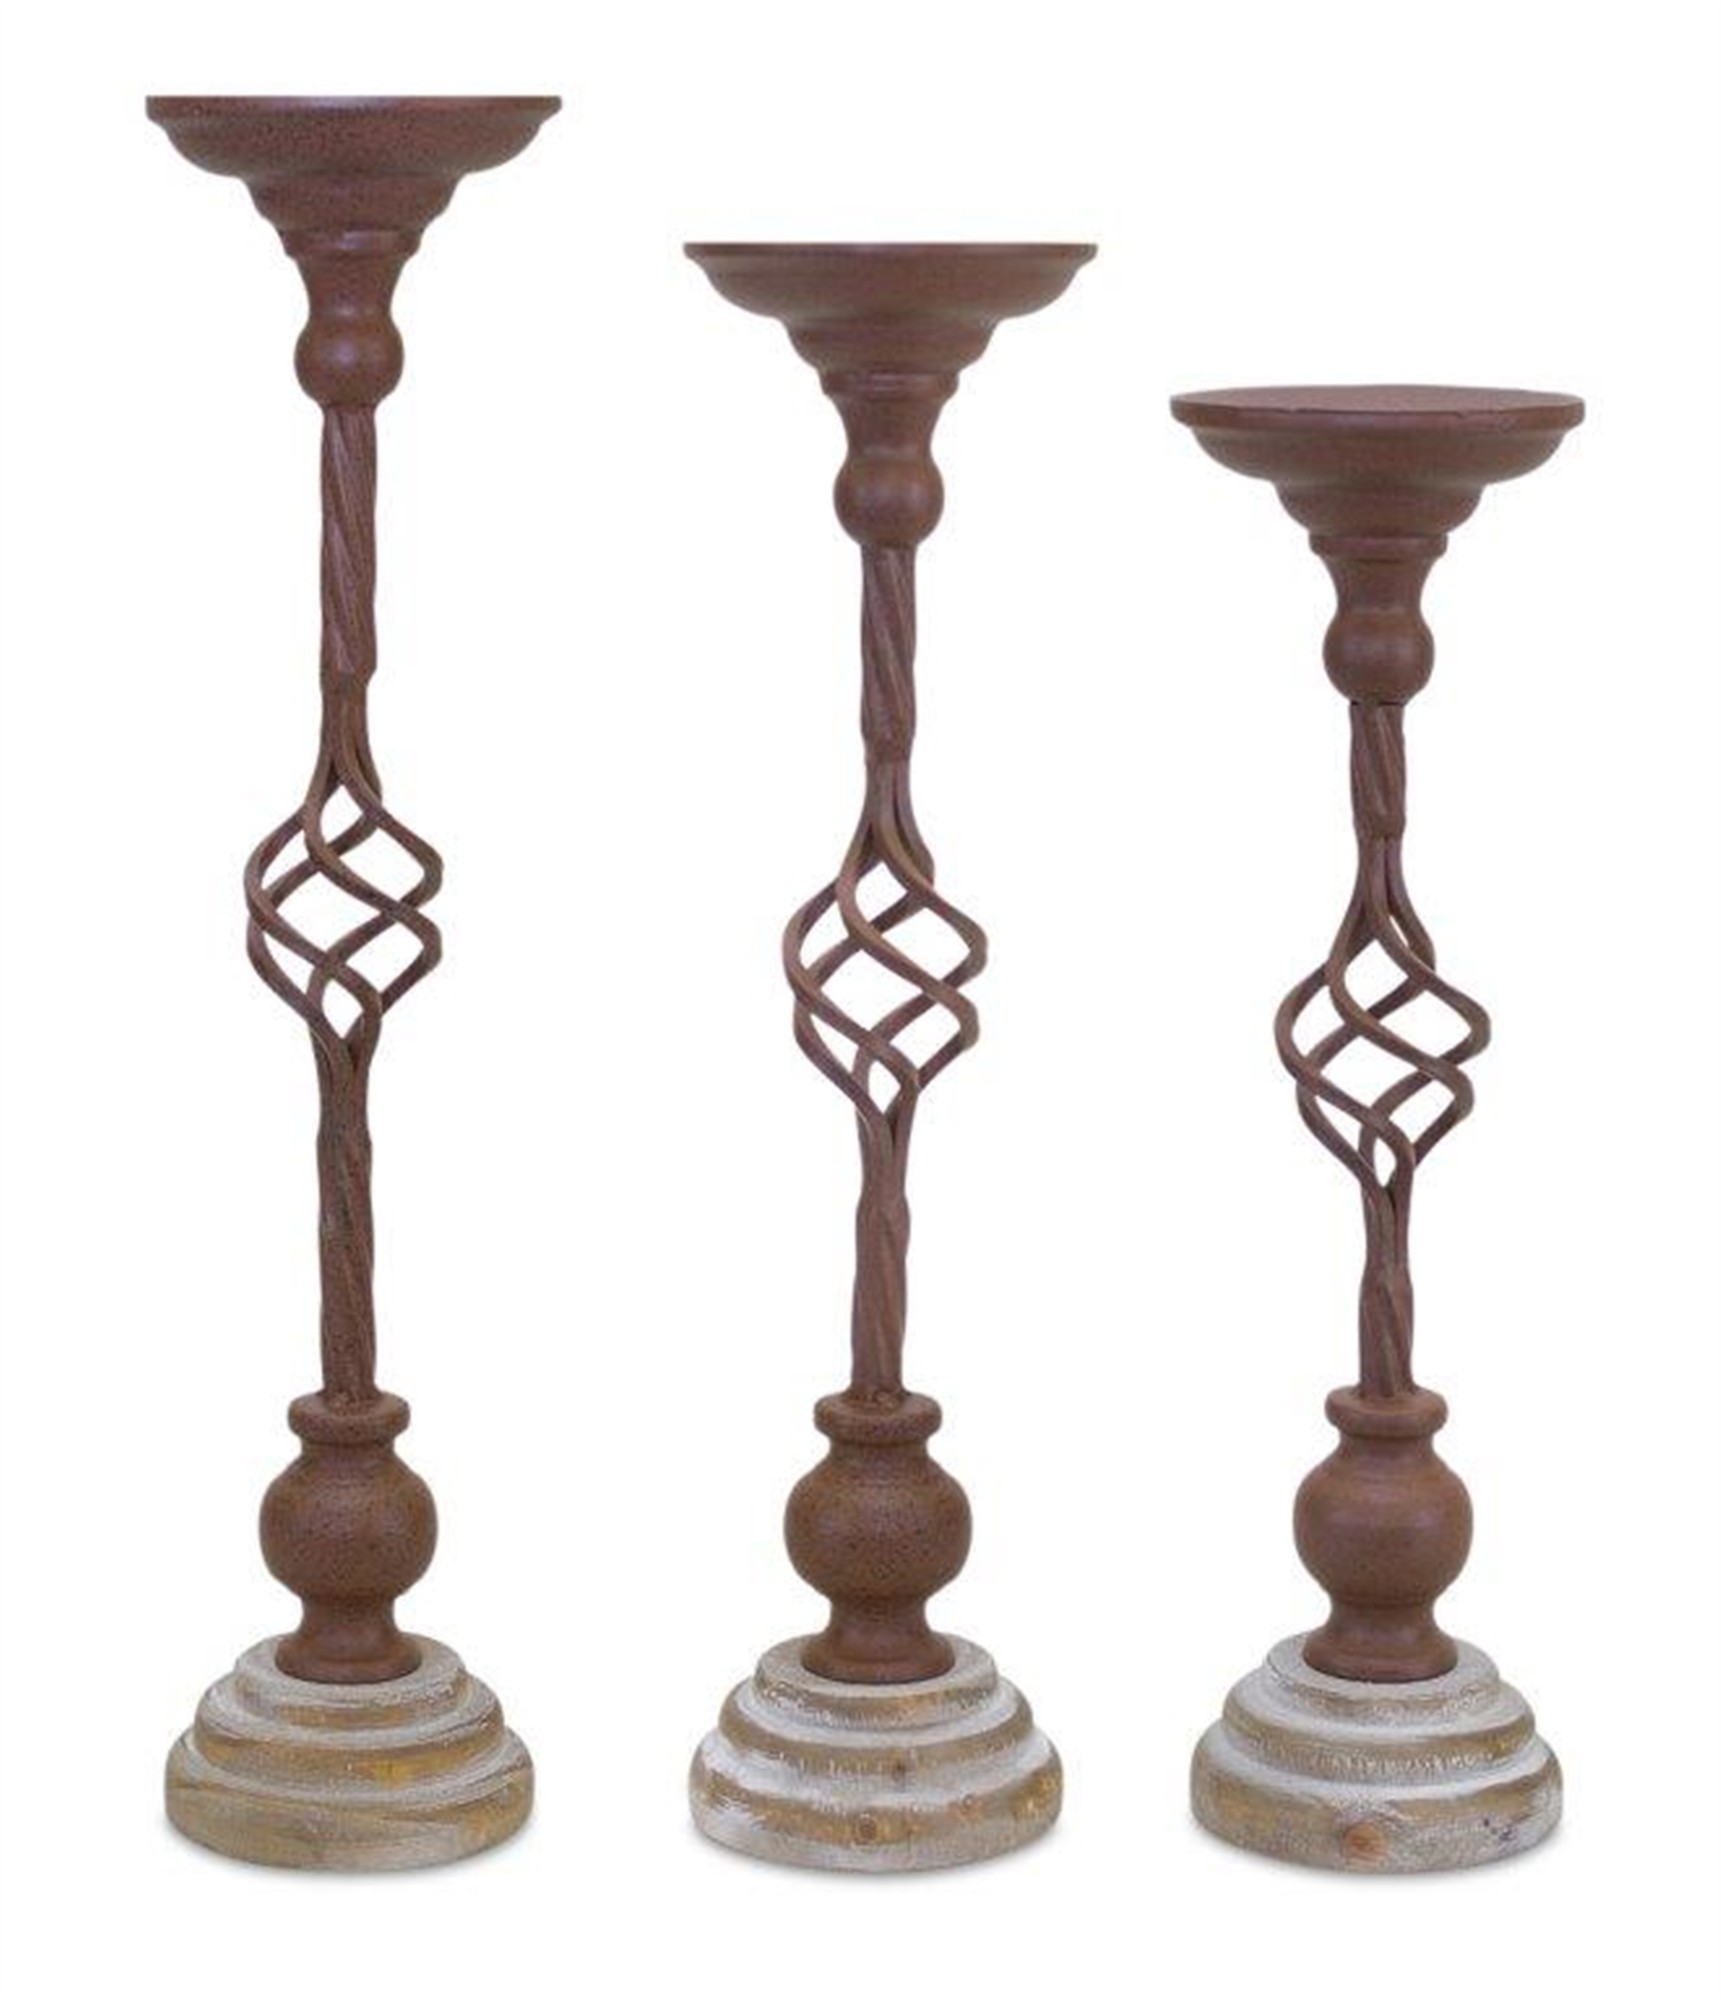 Candle Holder (Set of 3) 14.75"H, 16.25"H, 17.5"H Iron/Wood